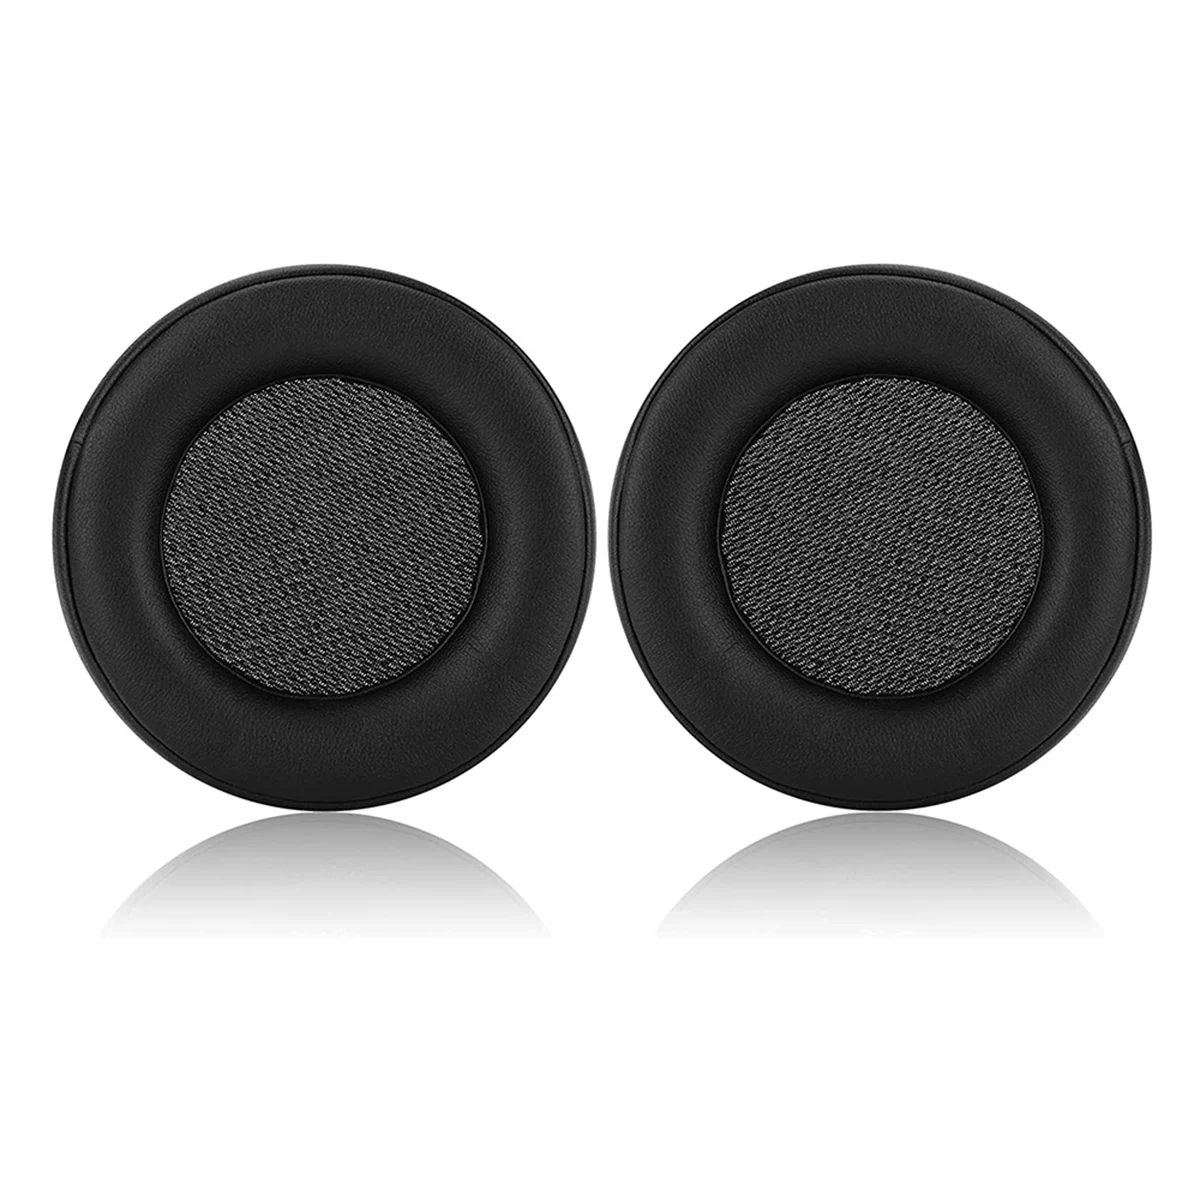 

Replacement Ear Pads Cushion Cover with Protein Leather for Corsair Virtuoso RGB Wireless SE Gaming Headset ONLY Black